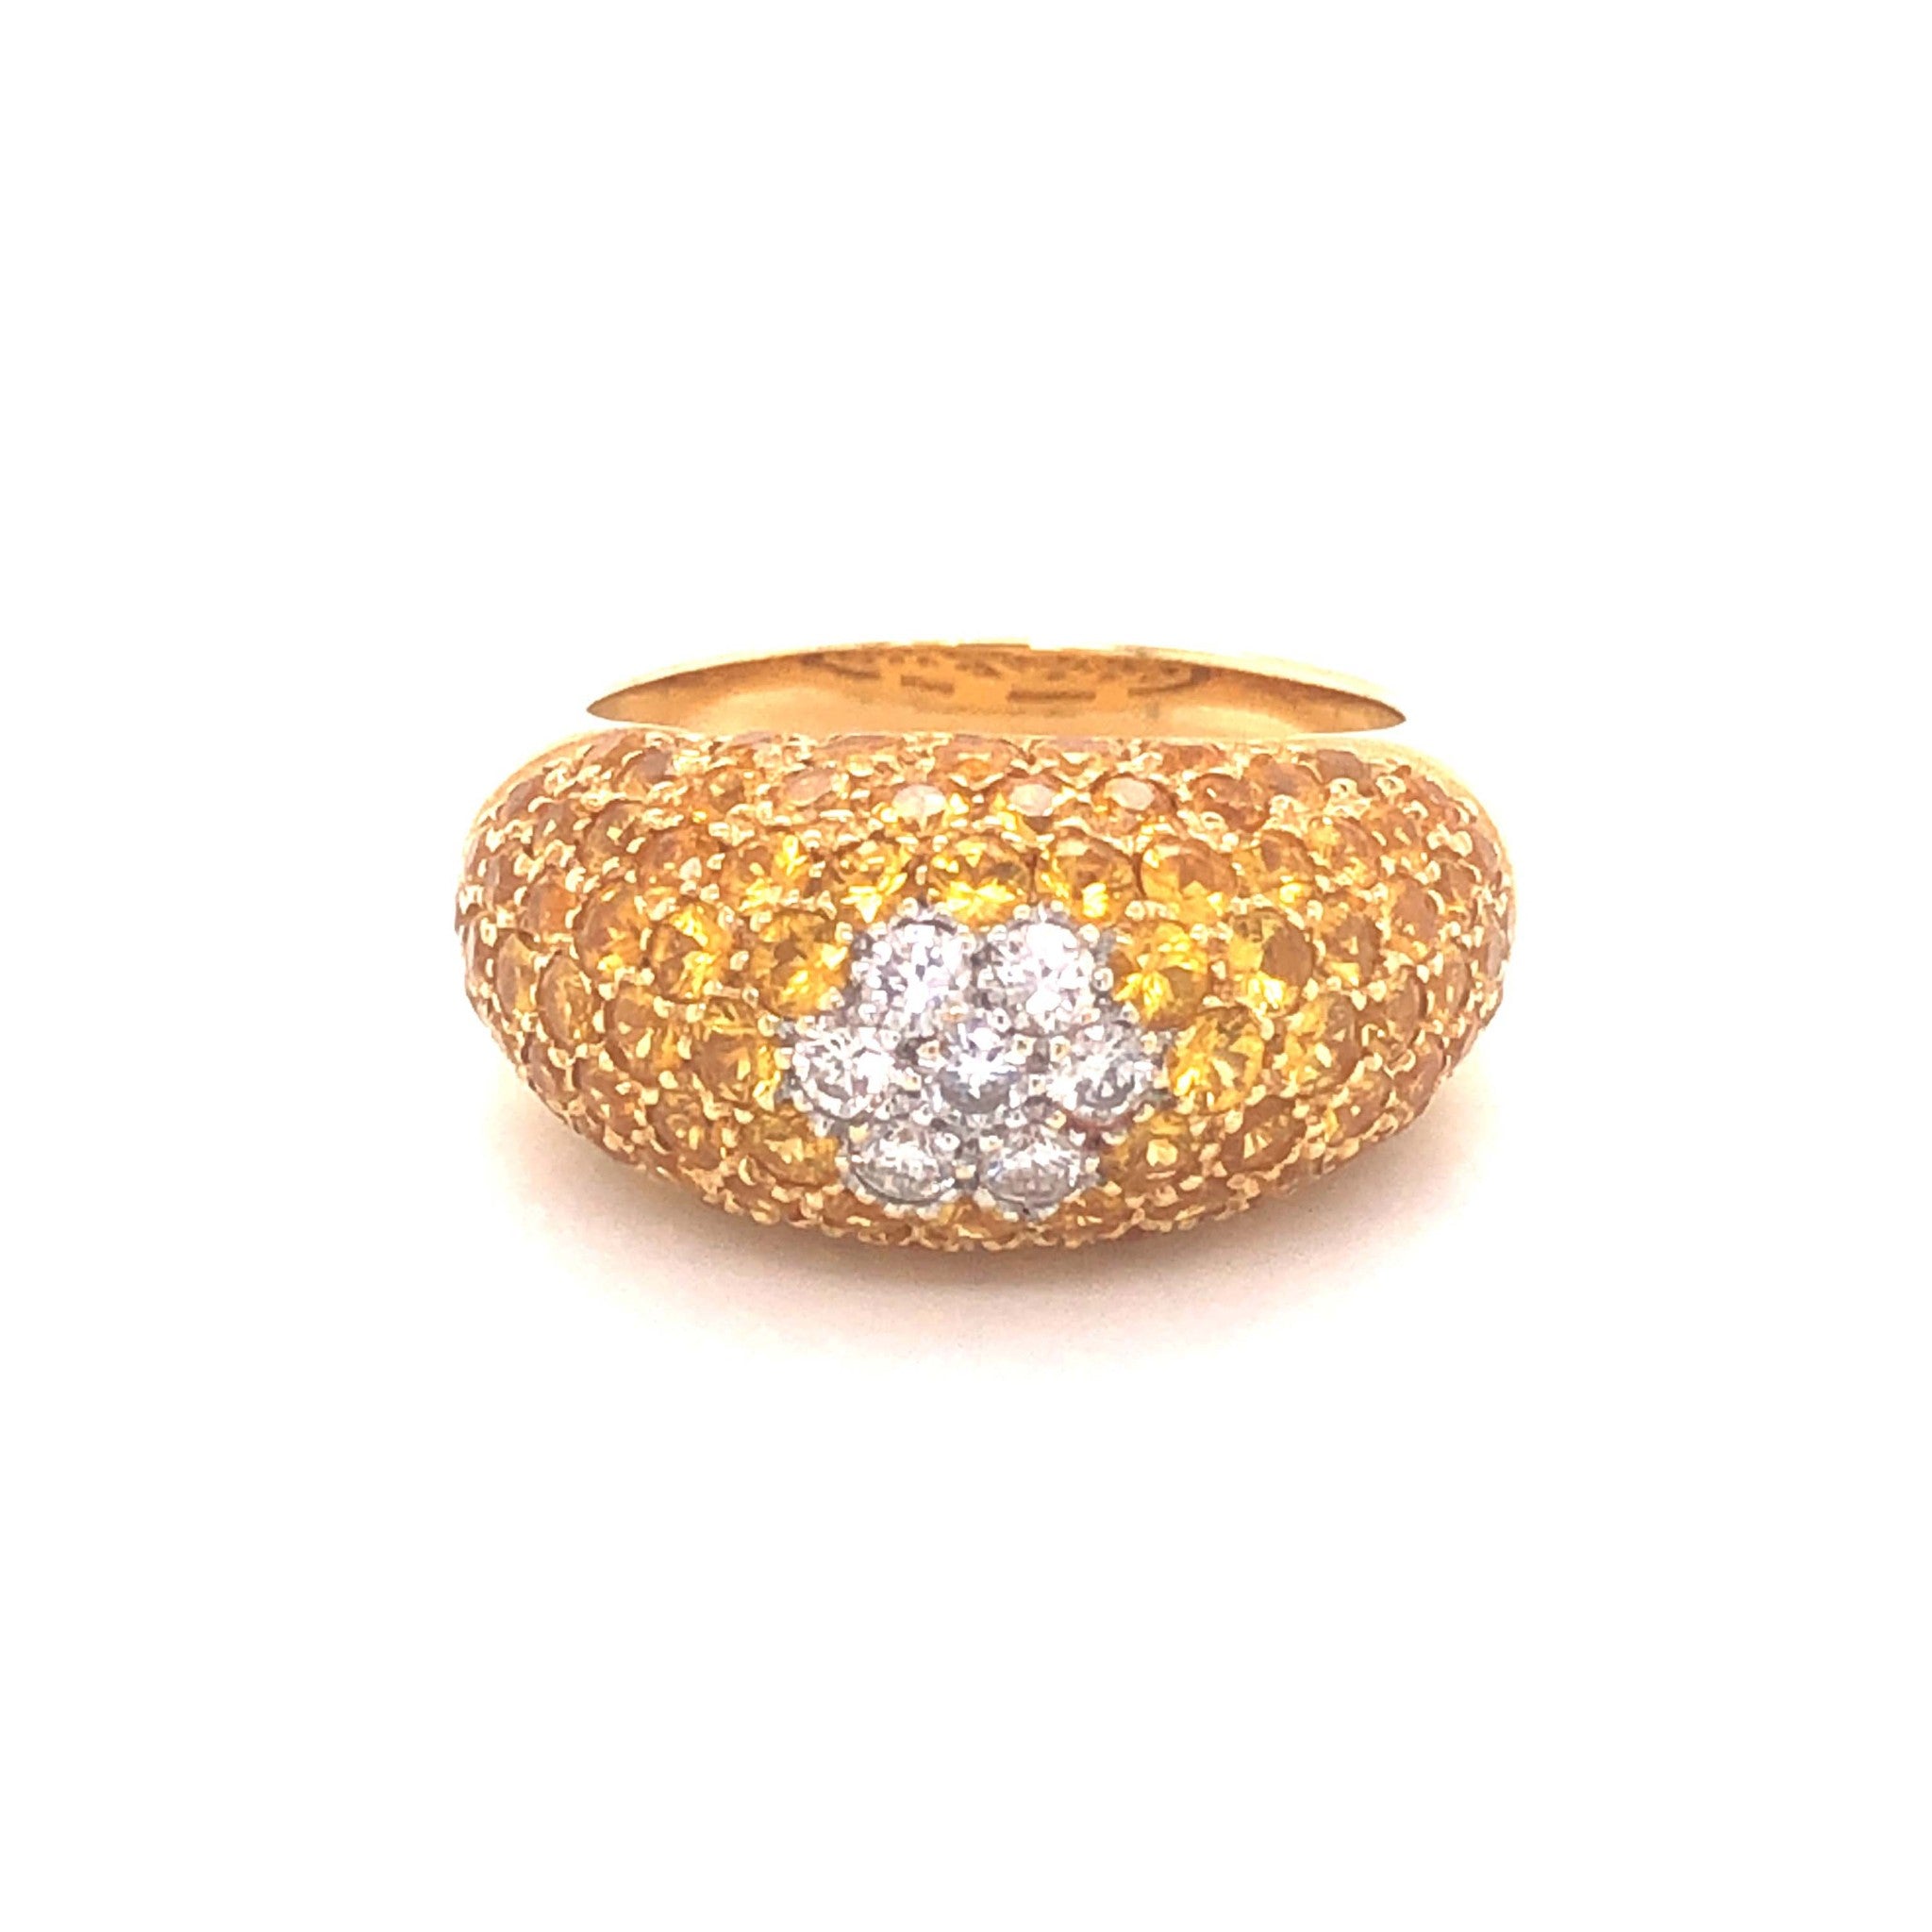 LeVians Yellow Sapphire and Diamond Dome Ring -18k Yellow Gold